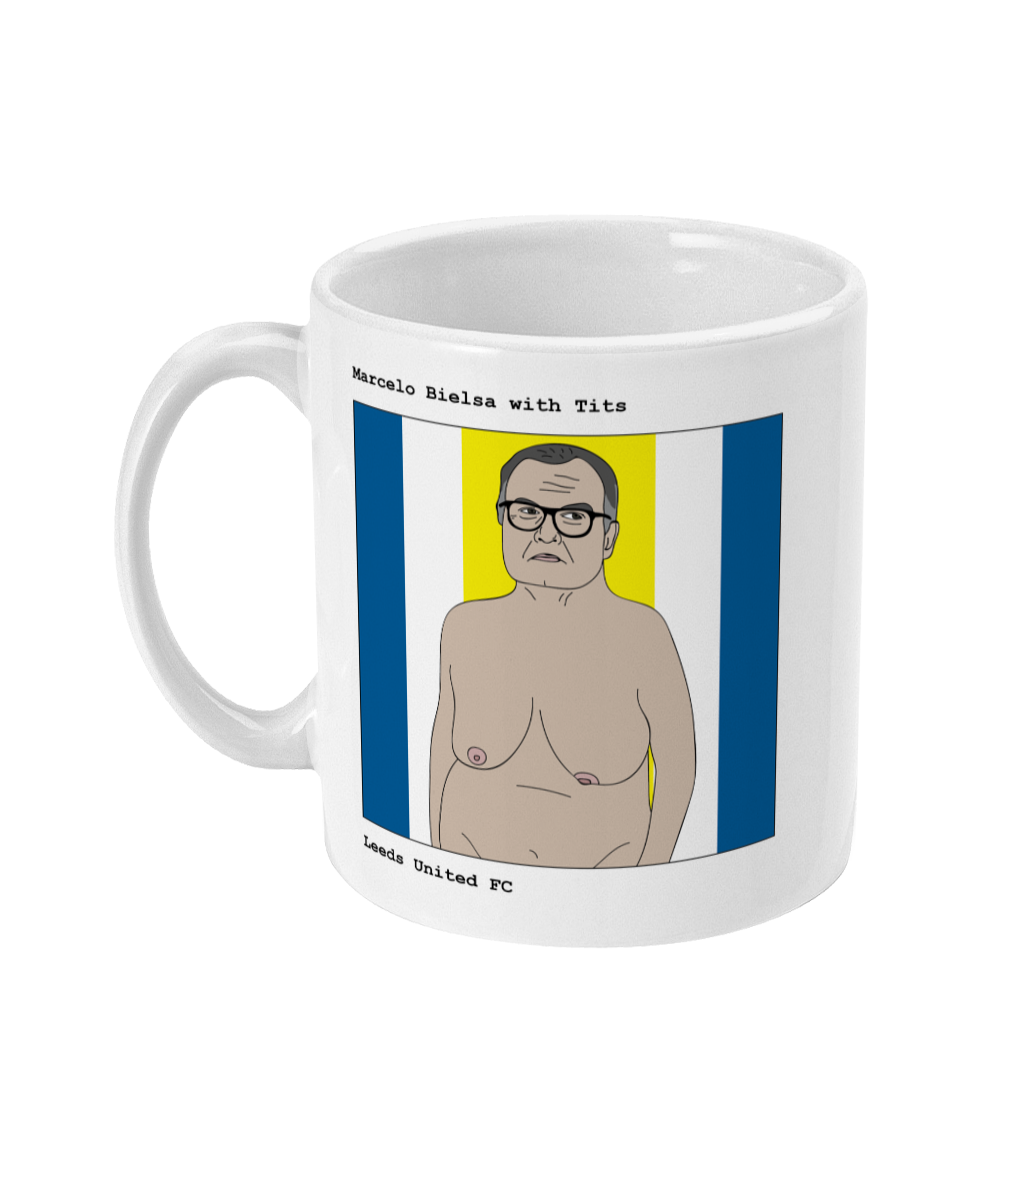 Marcelo Bielsa with Tits - Footballers with Tits